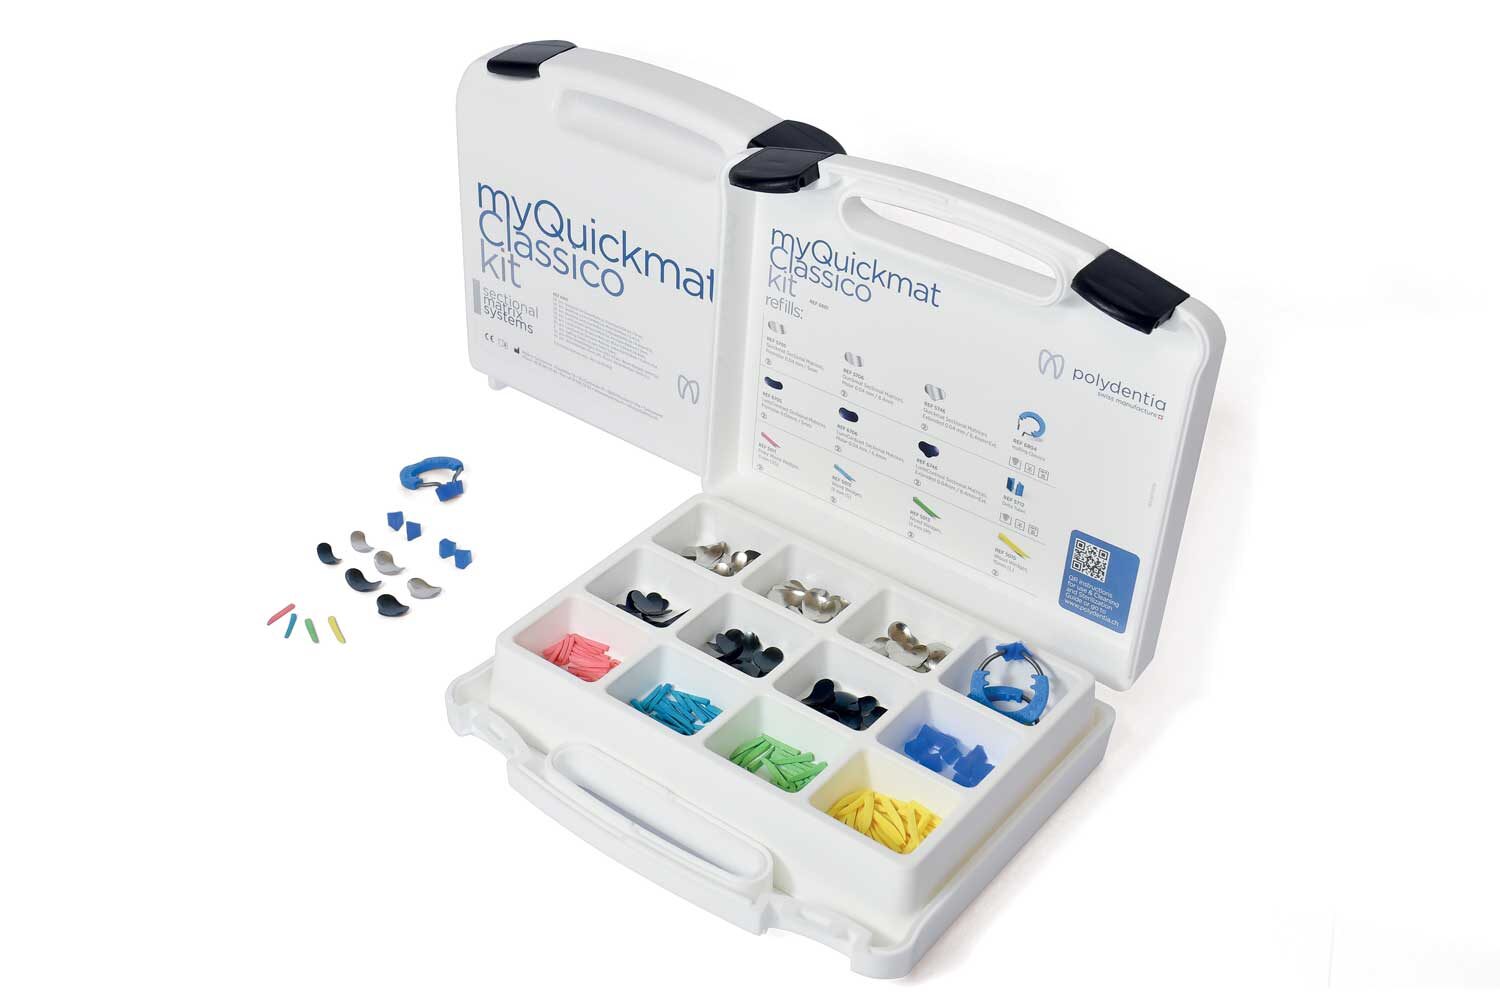 myQuickmat Classico kit sectional matrix system for conservative dentistry